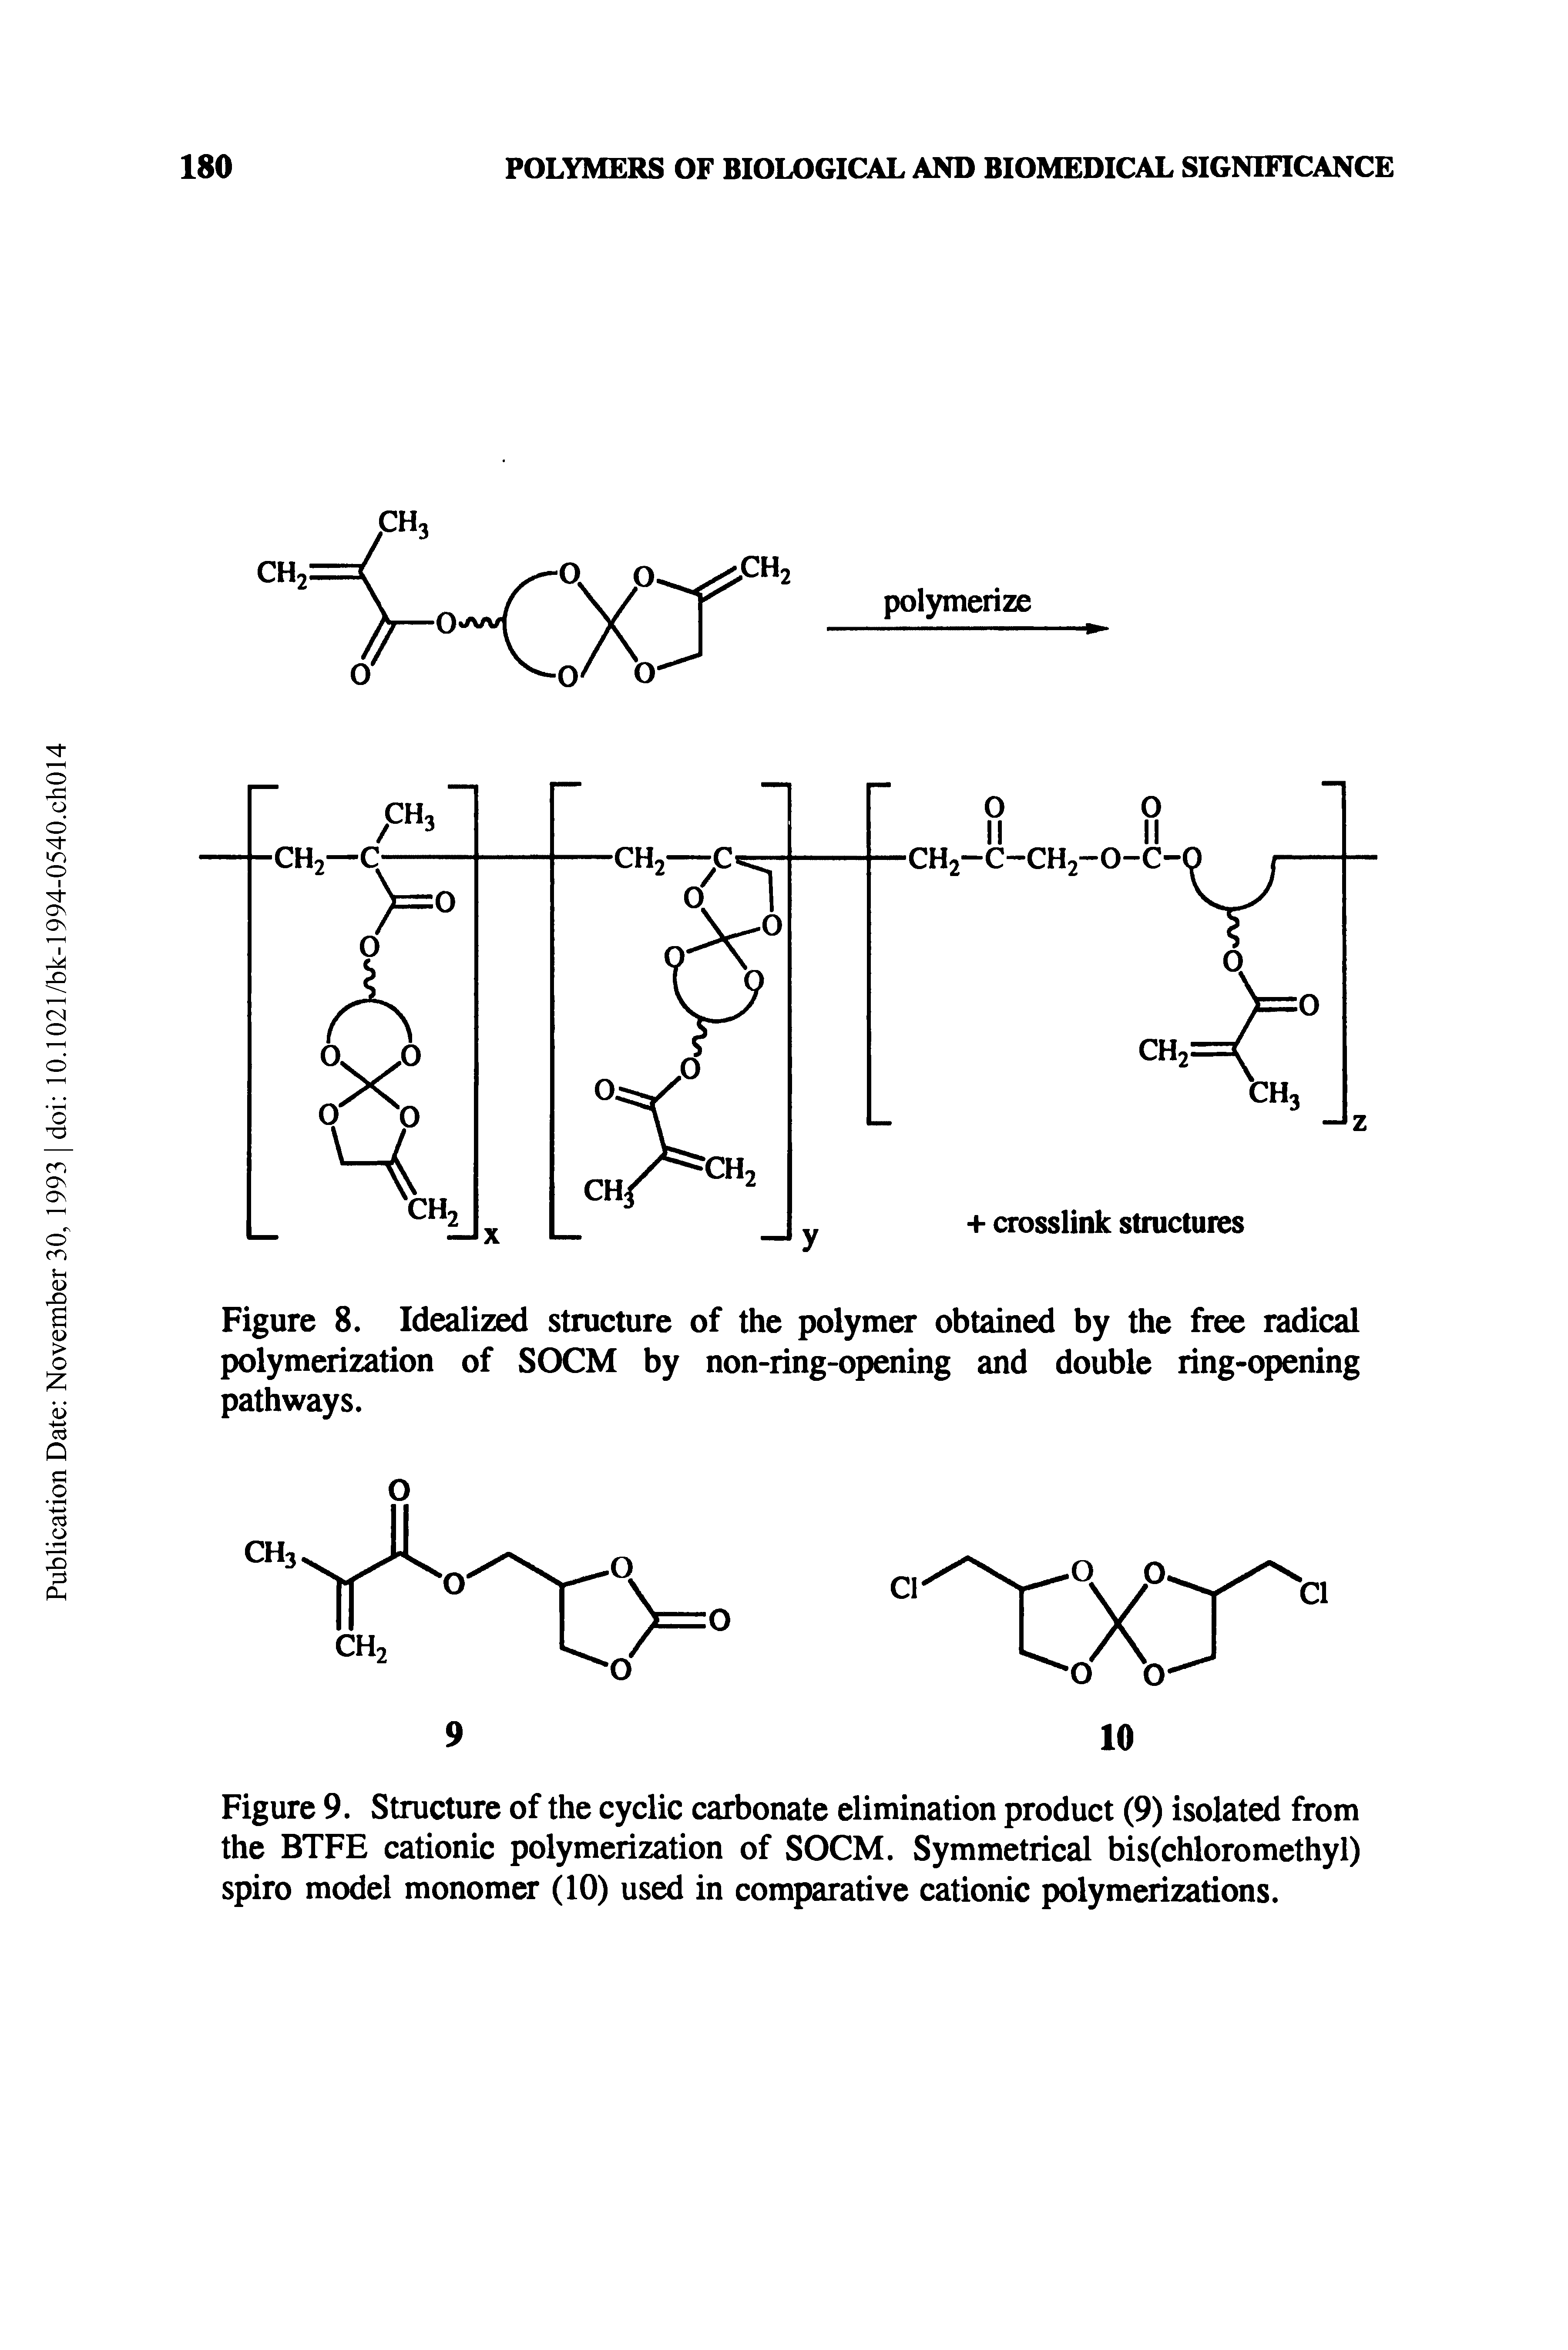 Figure 8. Idealized structure of the polymer obtained by the free radical polymerization of SOCM by non-ring-opening and double ring-opening pathways.